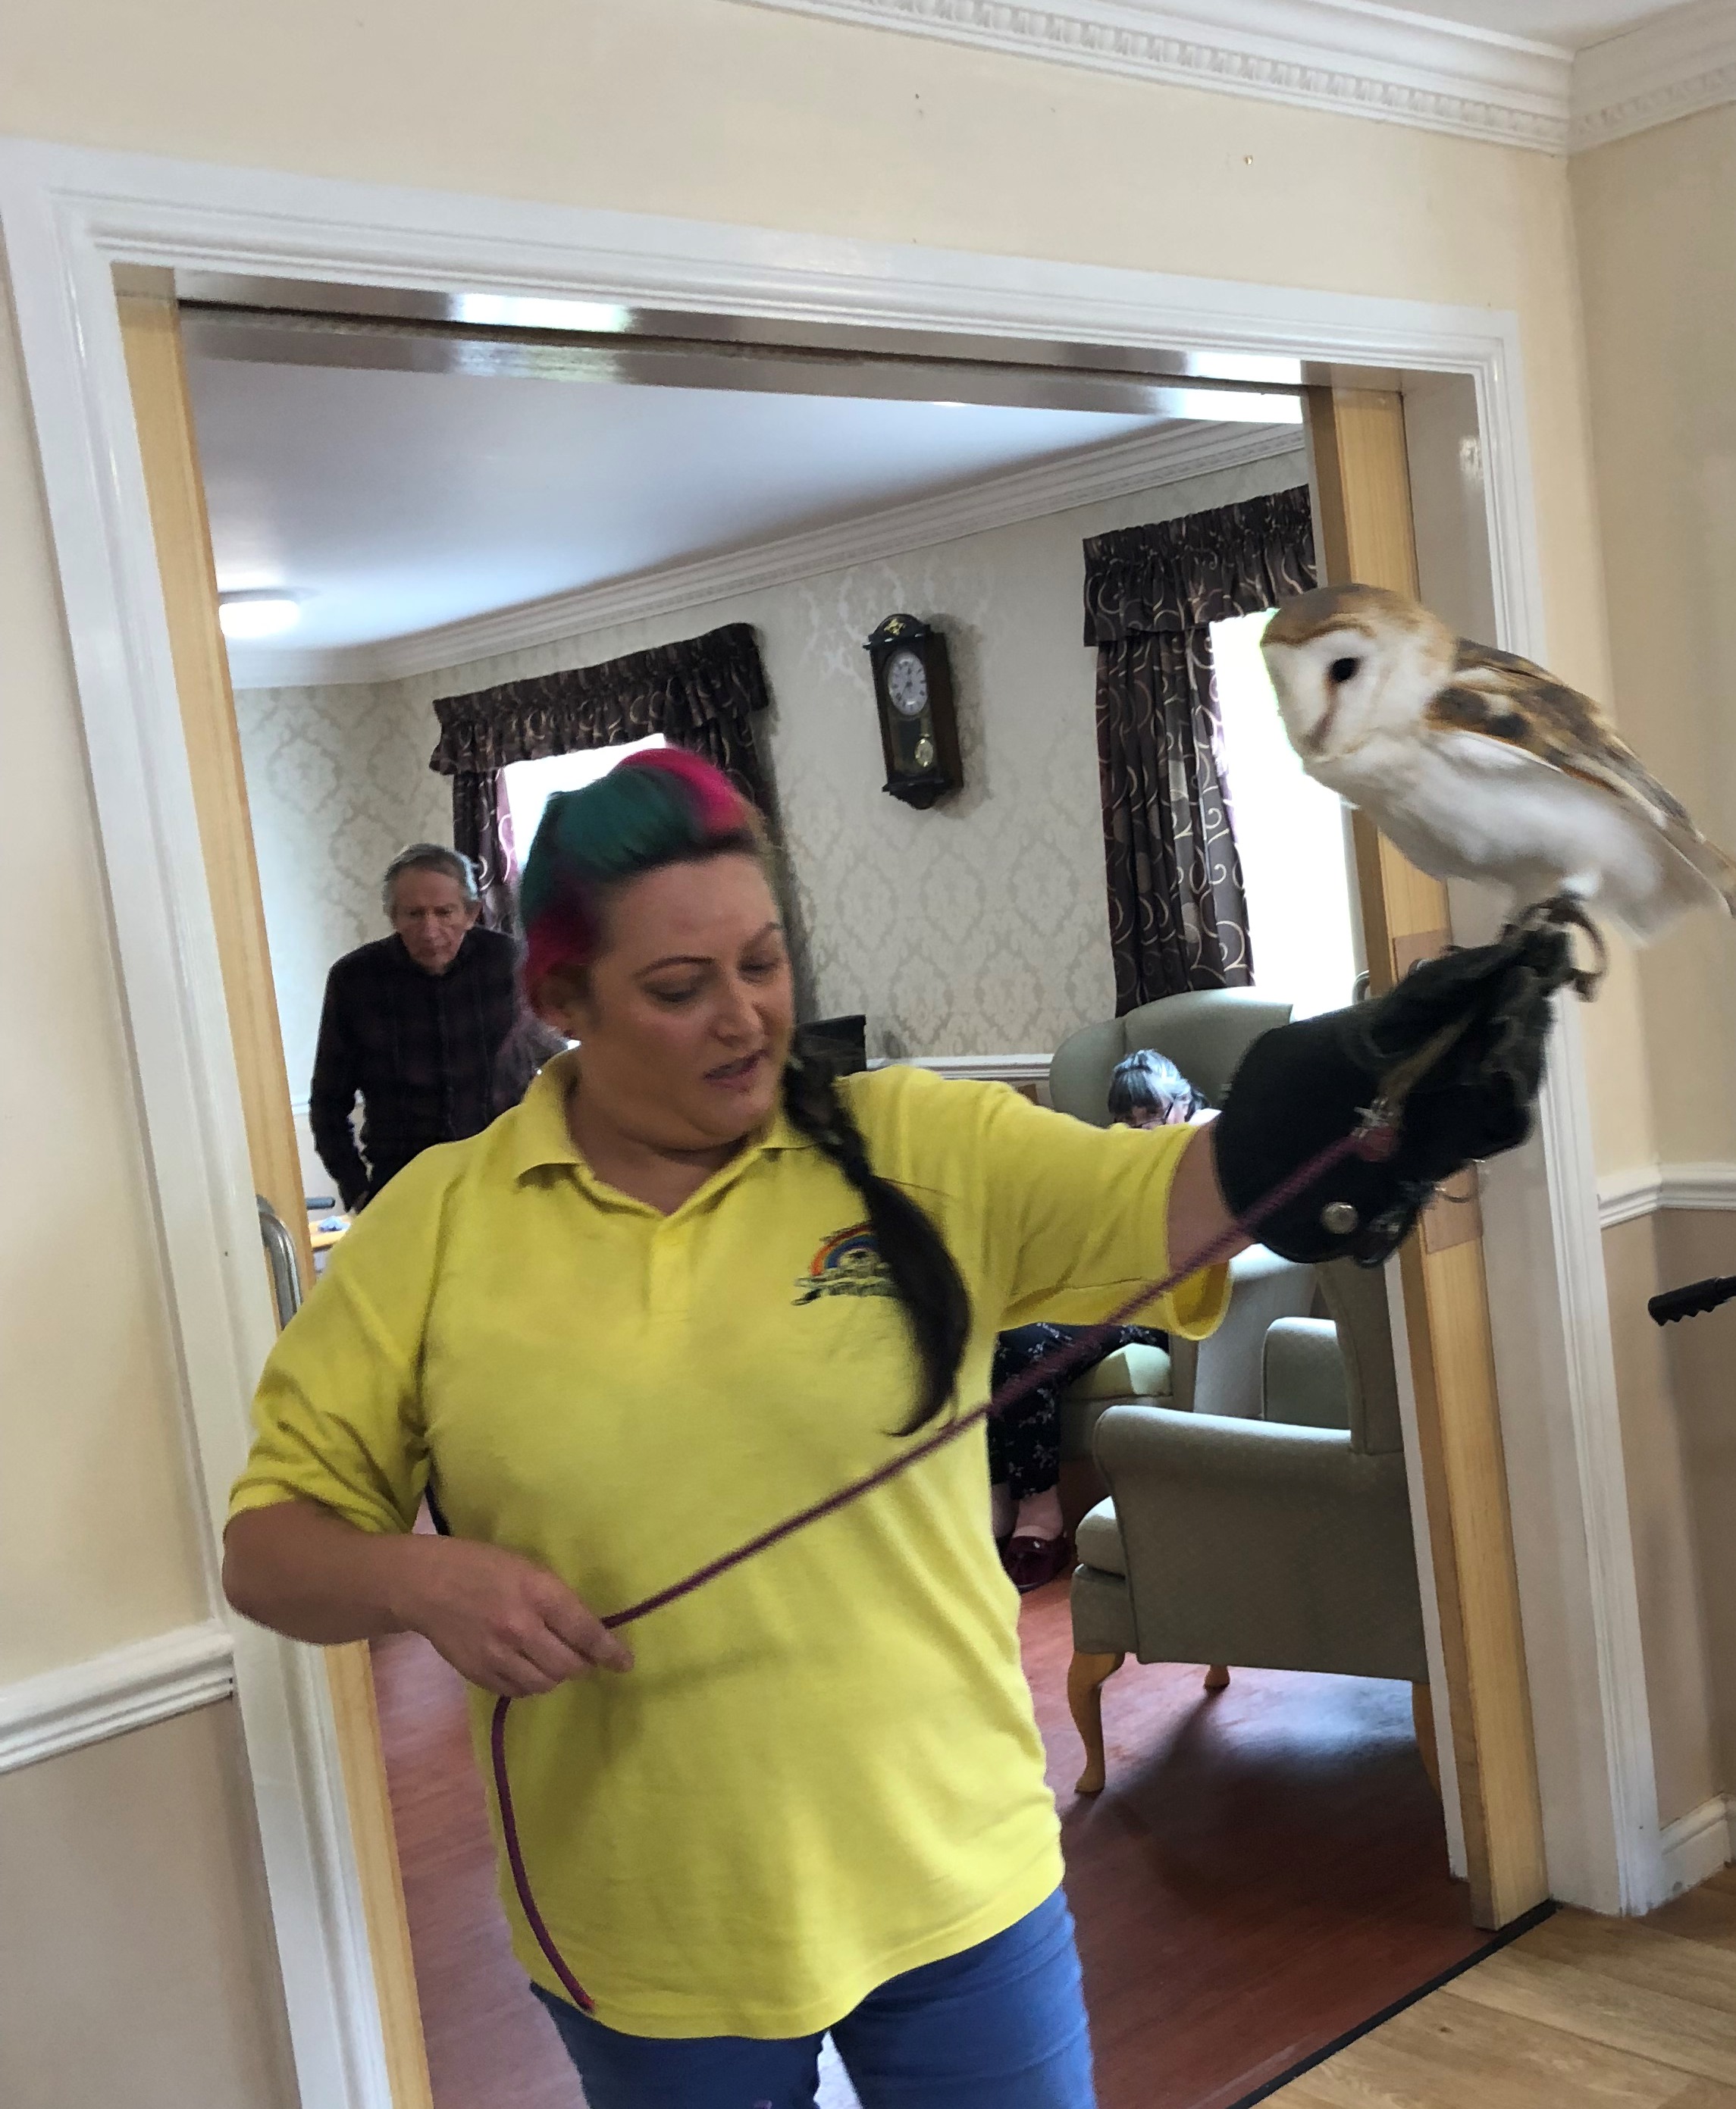 Crazy Creatures Barn Owl: Key Healthcare is dedicated to caring for elderly residents in safe. We have multiple dementia care homes including our care home middlesbrough, our care home St. Helen and care home saltburn. We excel in monitoring and improving care levels.